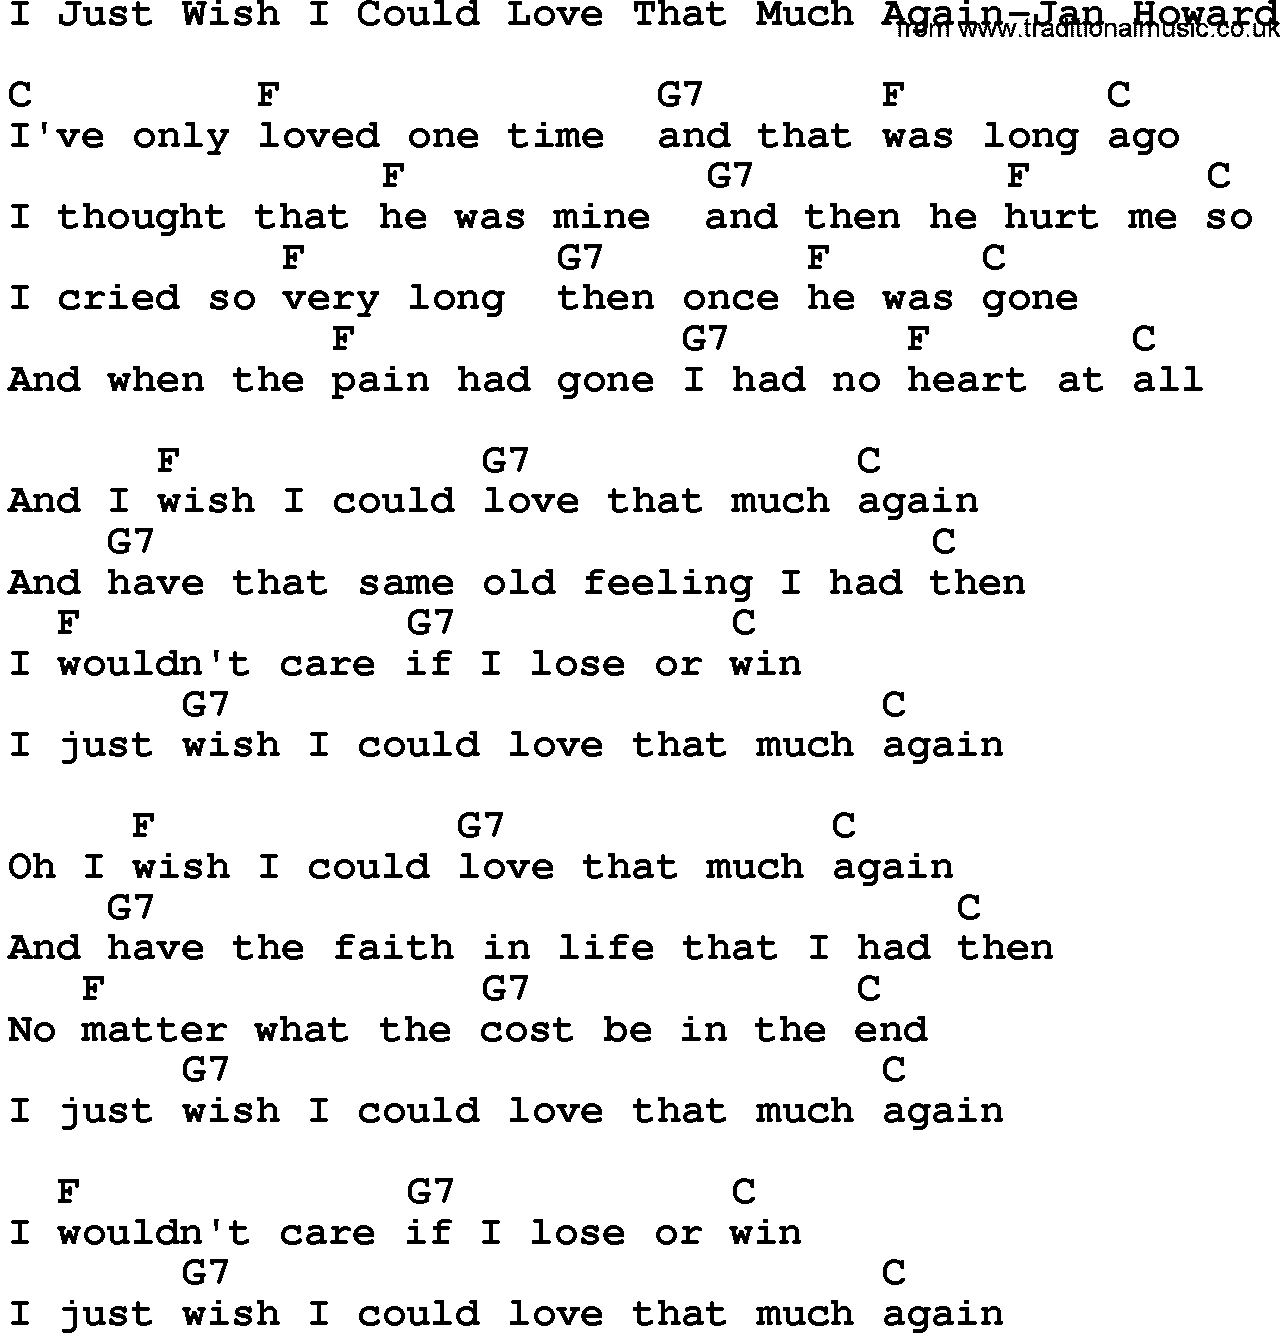 Country music song: I Just Wish I Could Love That Much Again-Jan Howard lyrics and chords